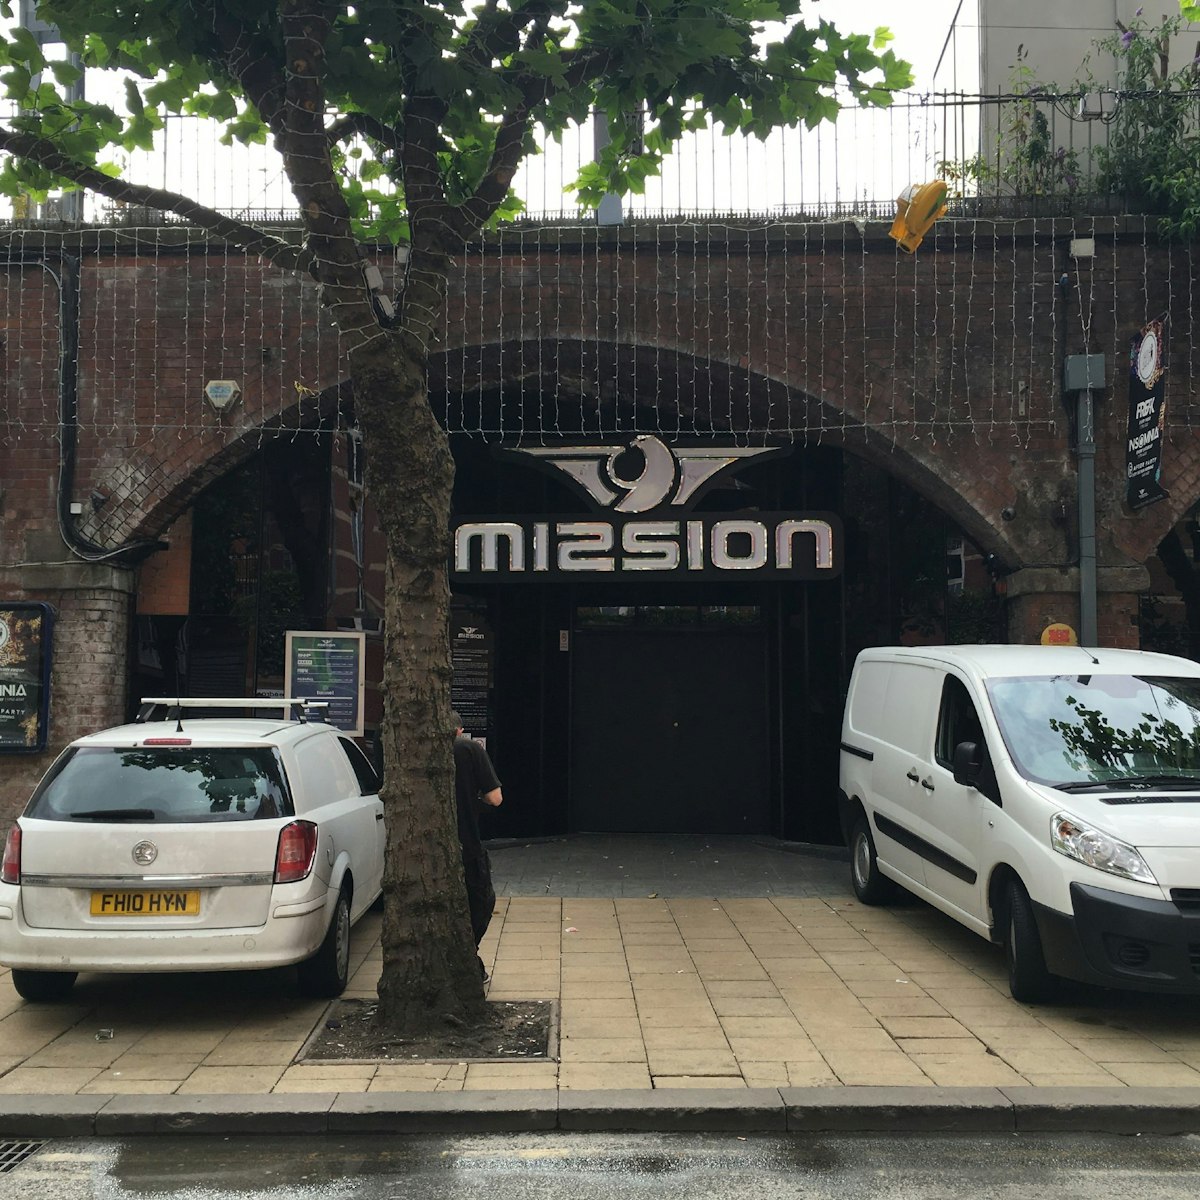 Mission's entrance, under the railway arches